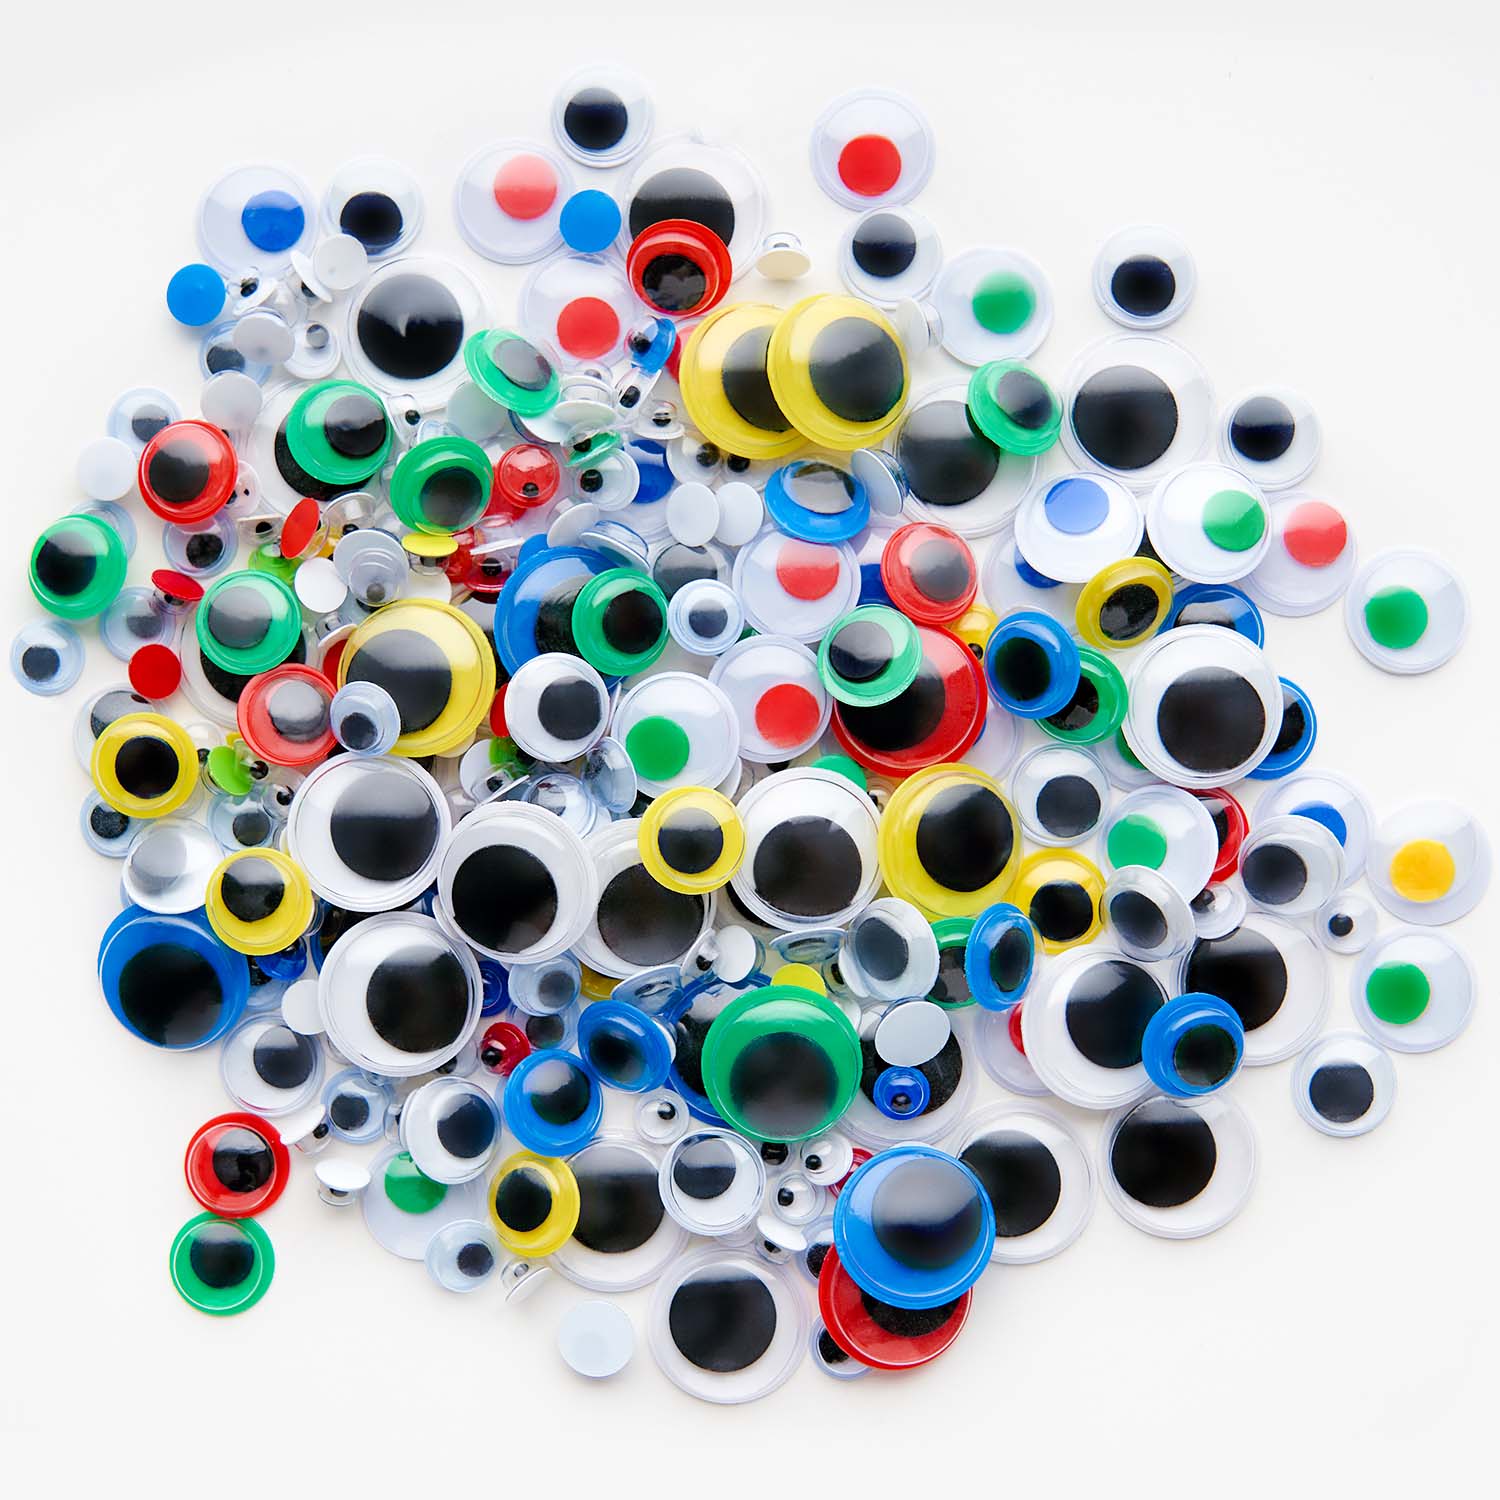 Accoutrements Big Googly Eyes - Big Googly Eyes . shop for